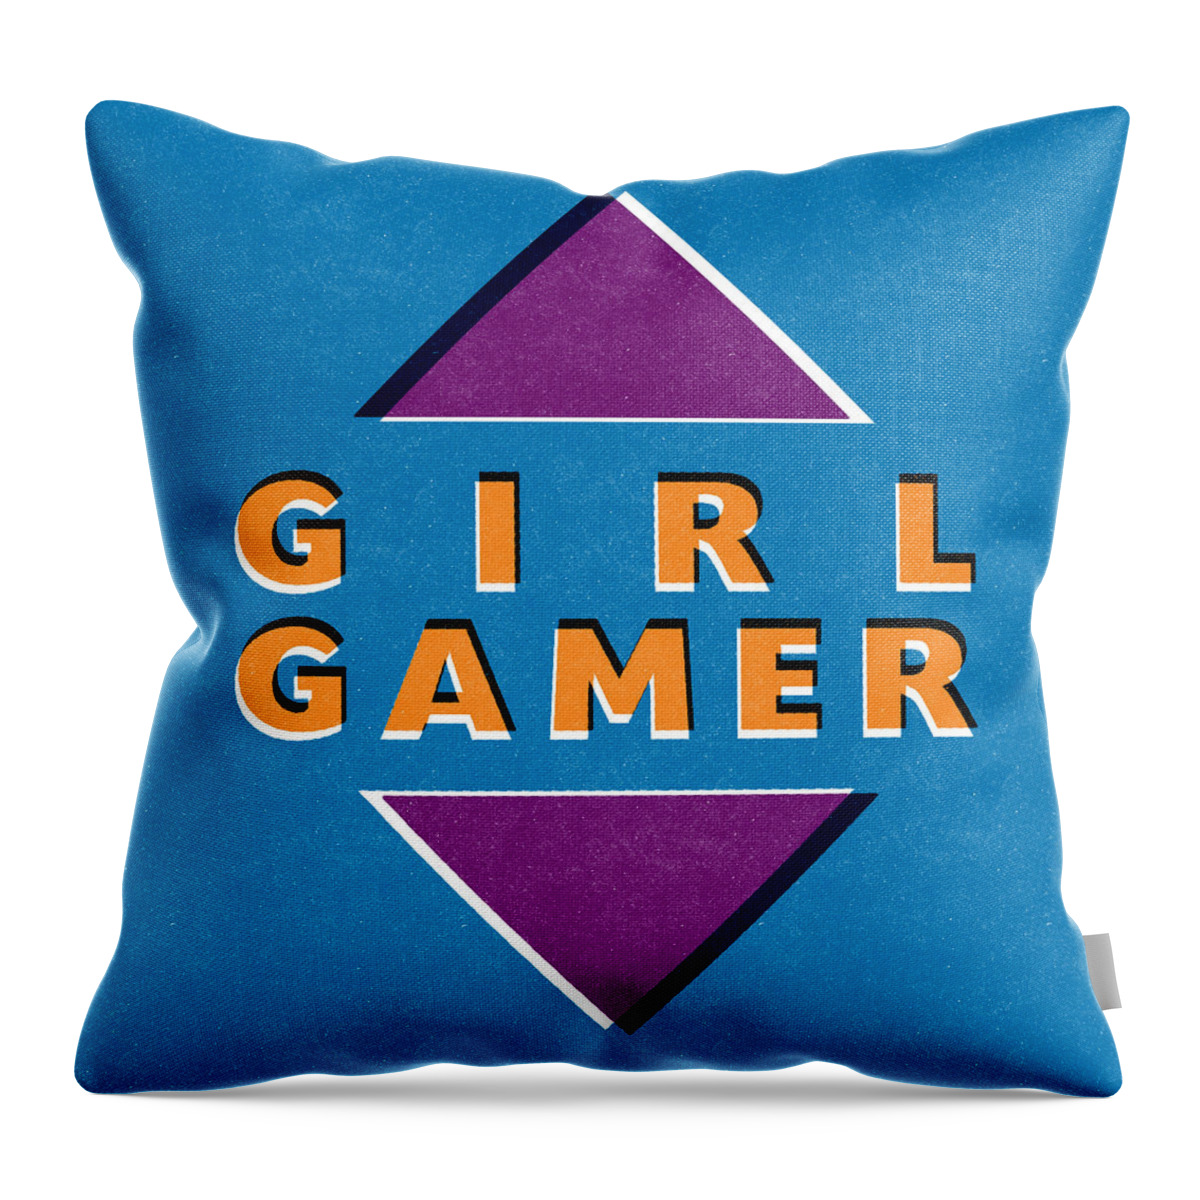 Girl Gamer Throw Pillow featuring the mixed media Girl Gamer by Linda Woods